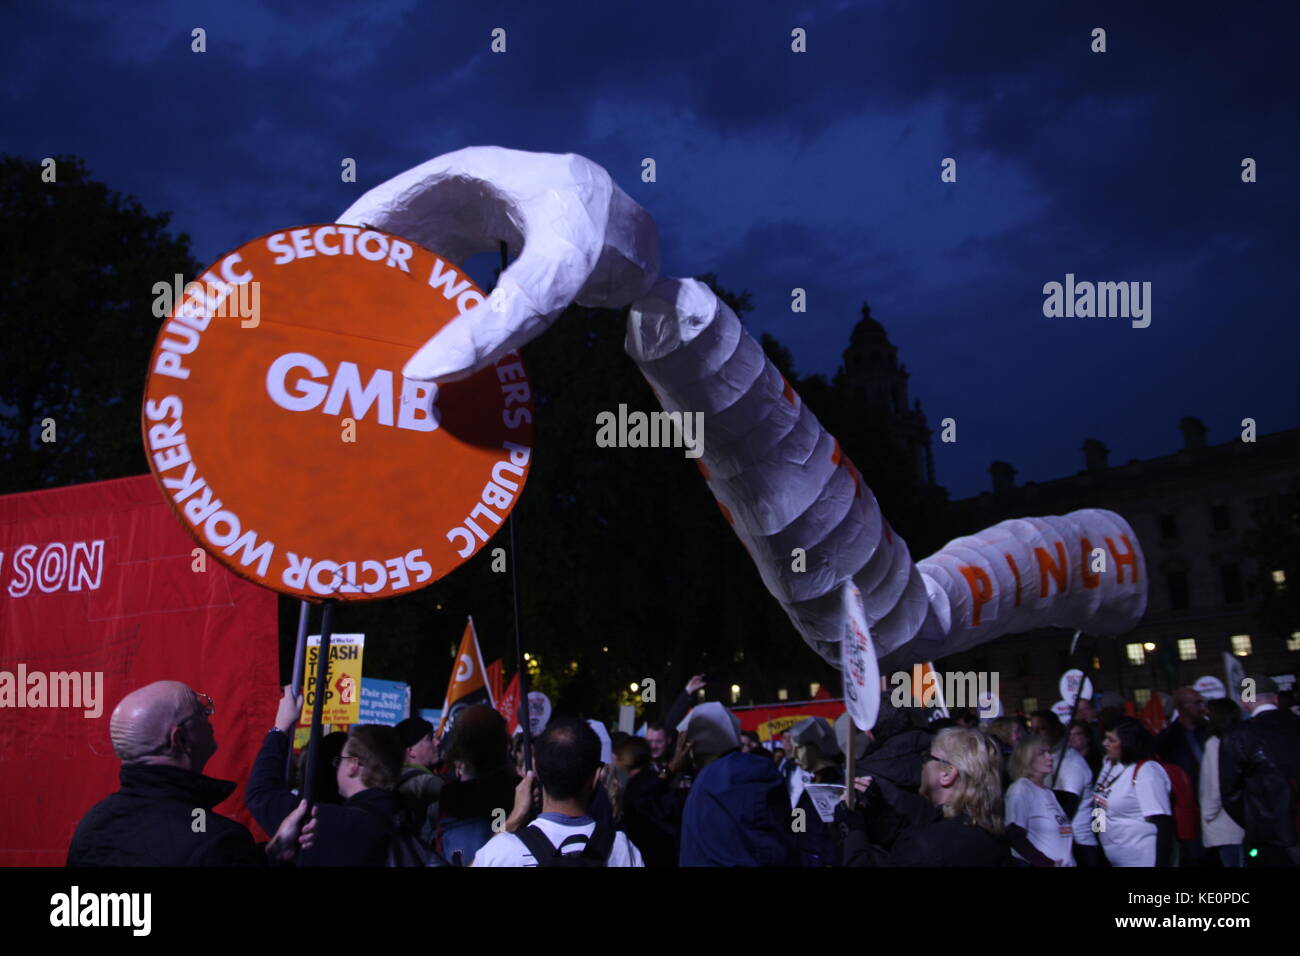 London, UK. 17th October 2017. The TUC holds a rally in Westminster to protest the 1% cap on payrises to government employees. A giant hand pinches pay. Roland Ravenhill/Alamy Live News Stock Photo